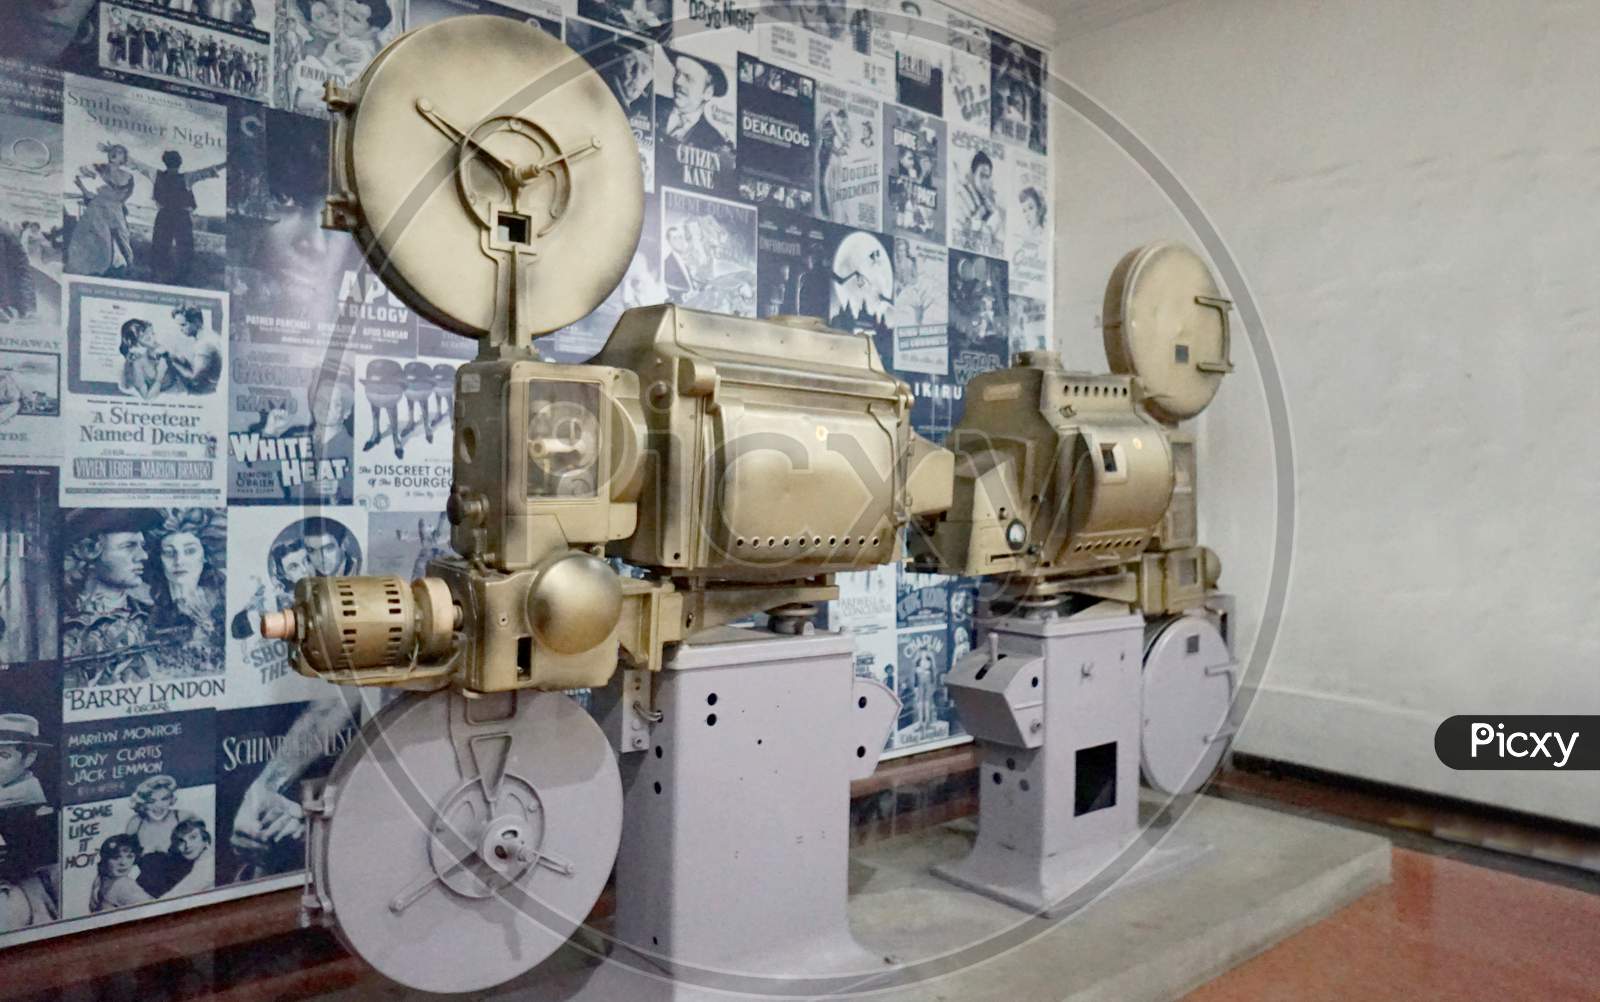 Old Antique Cinema Projector With Cine Posters In The Background.